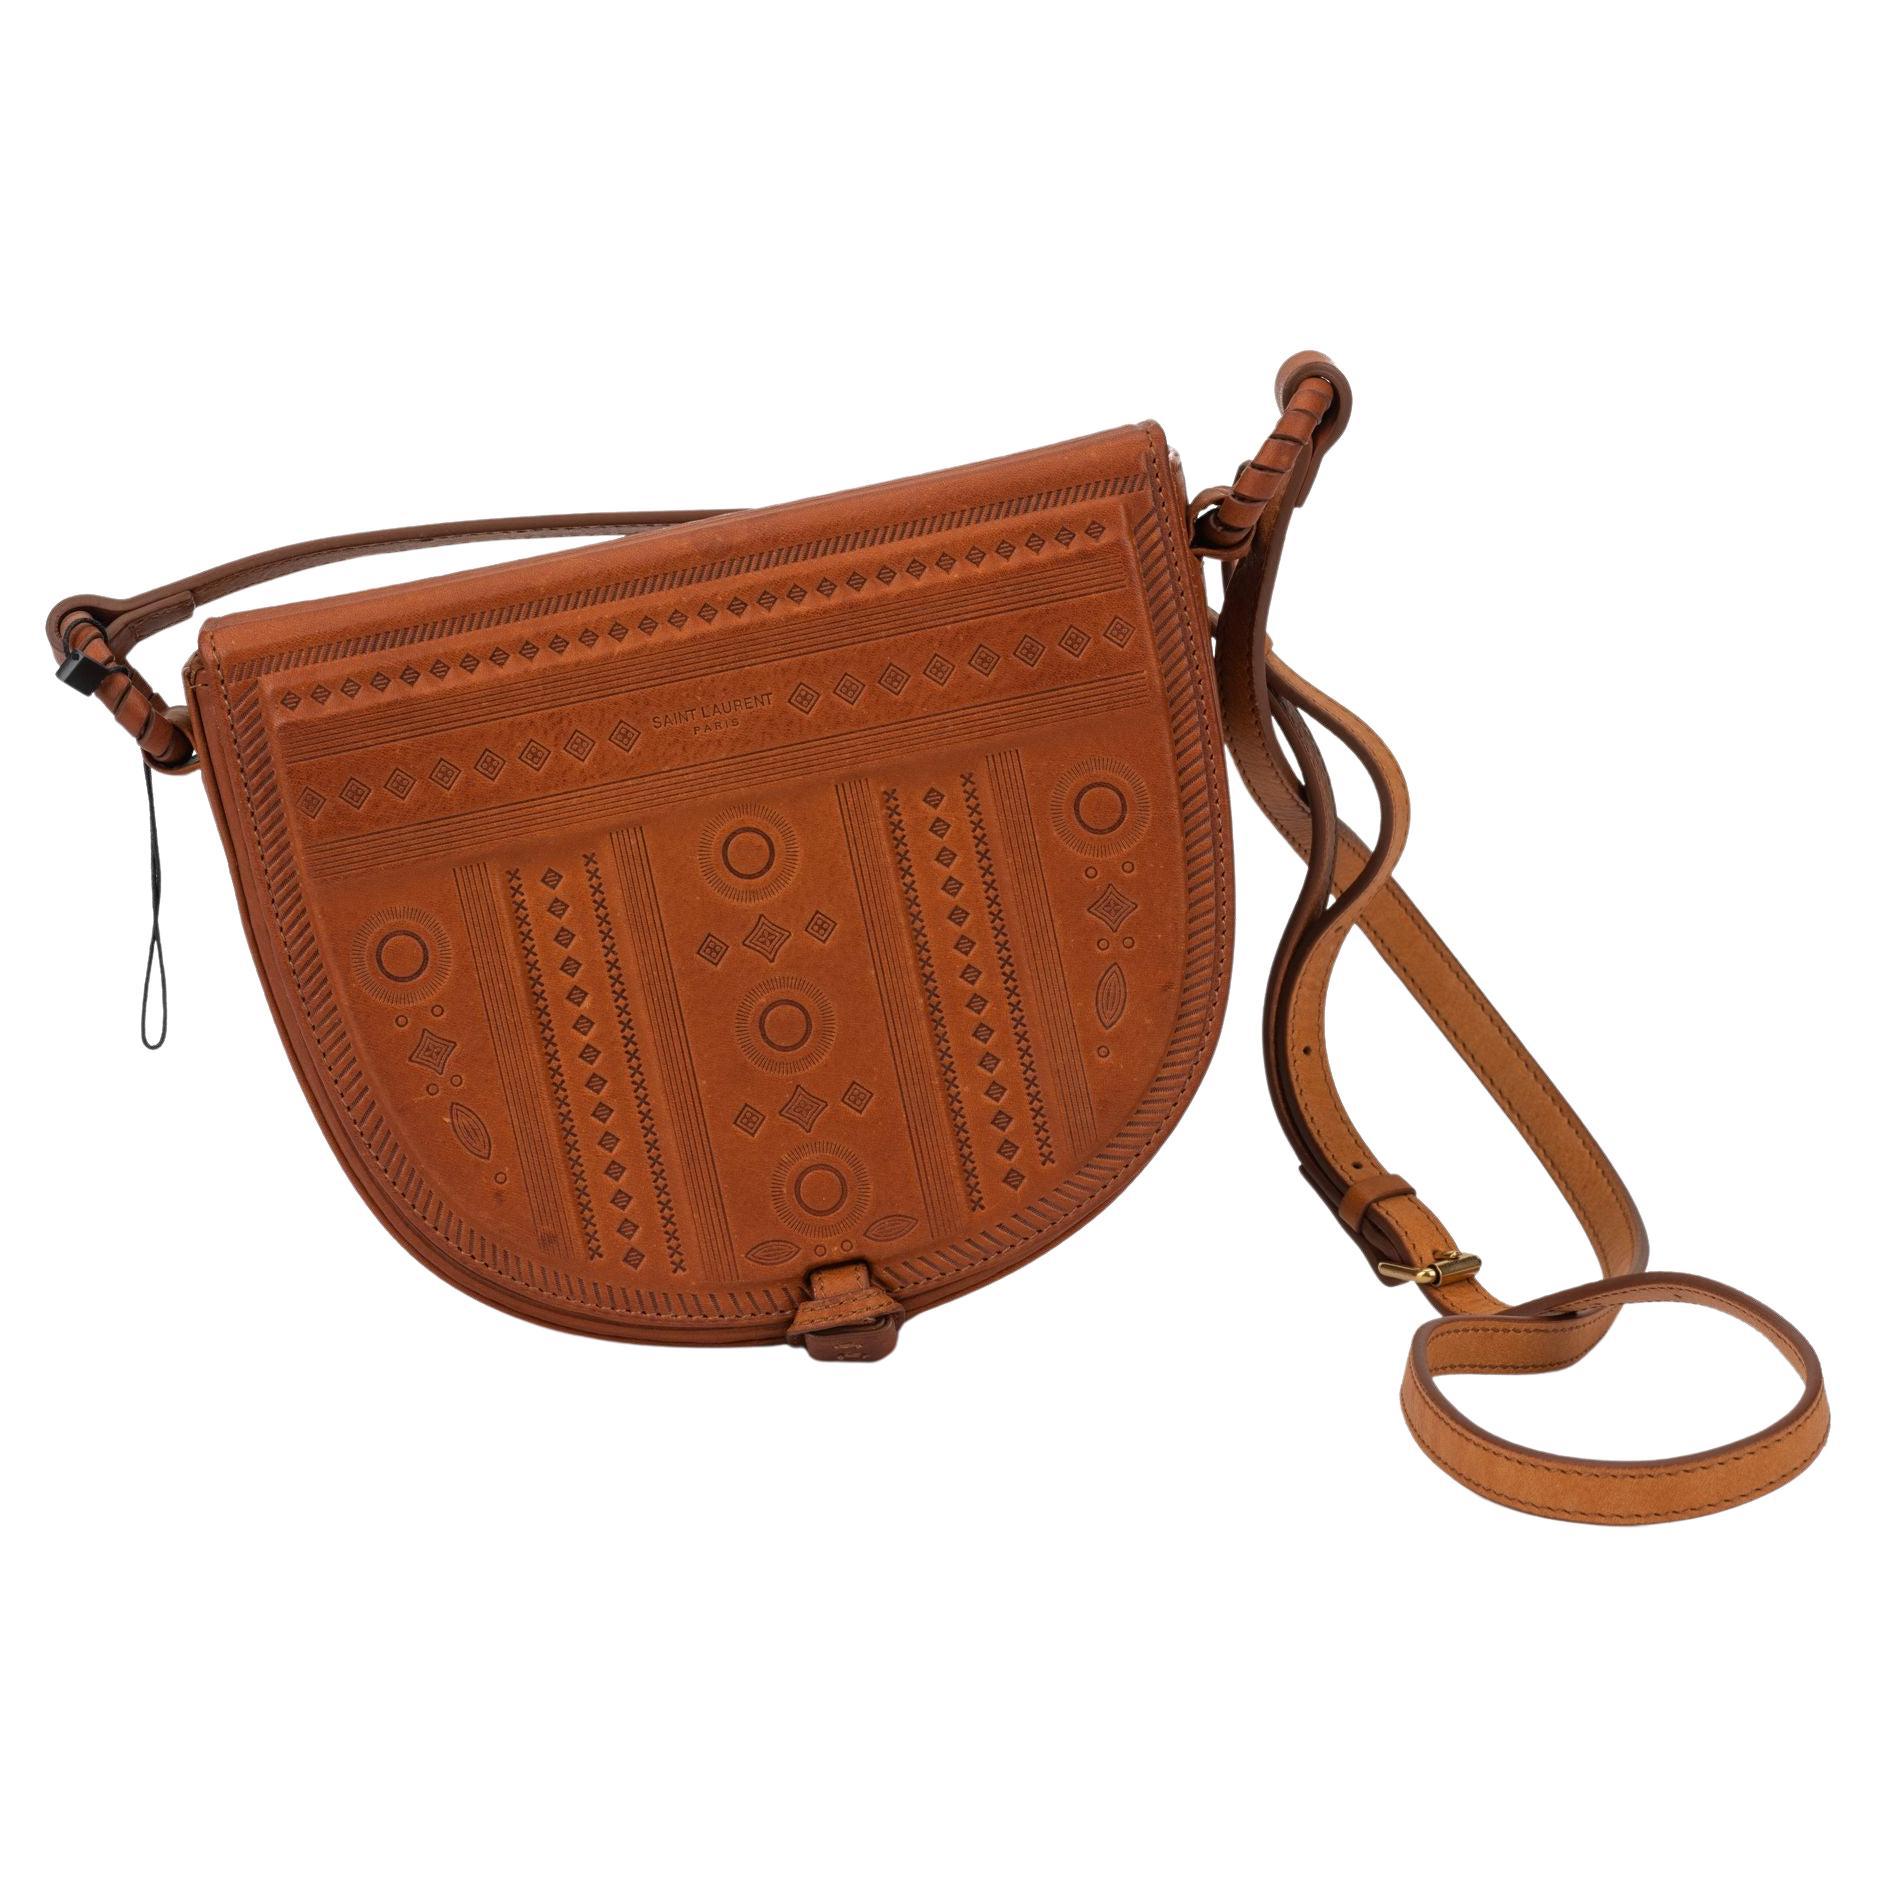 What is the best crossbody bag?